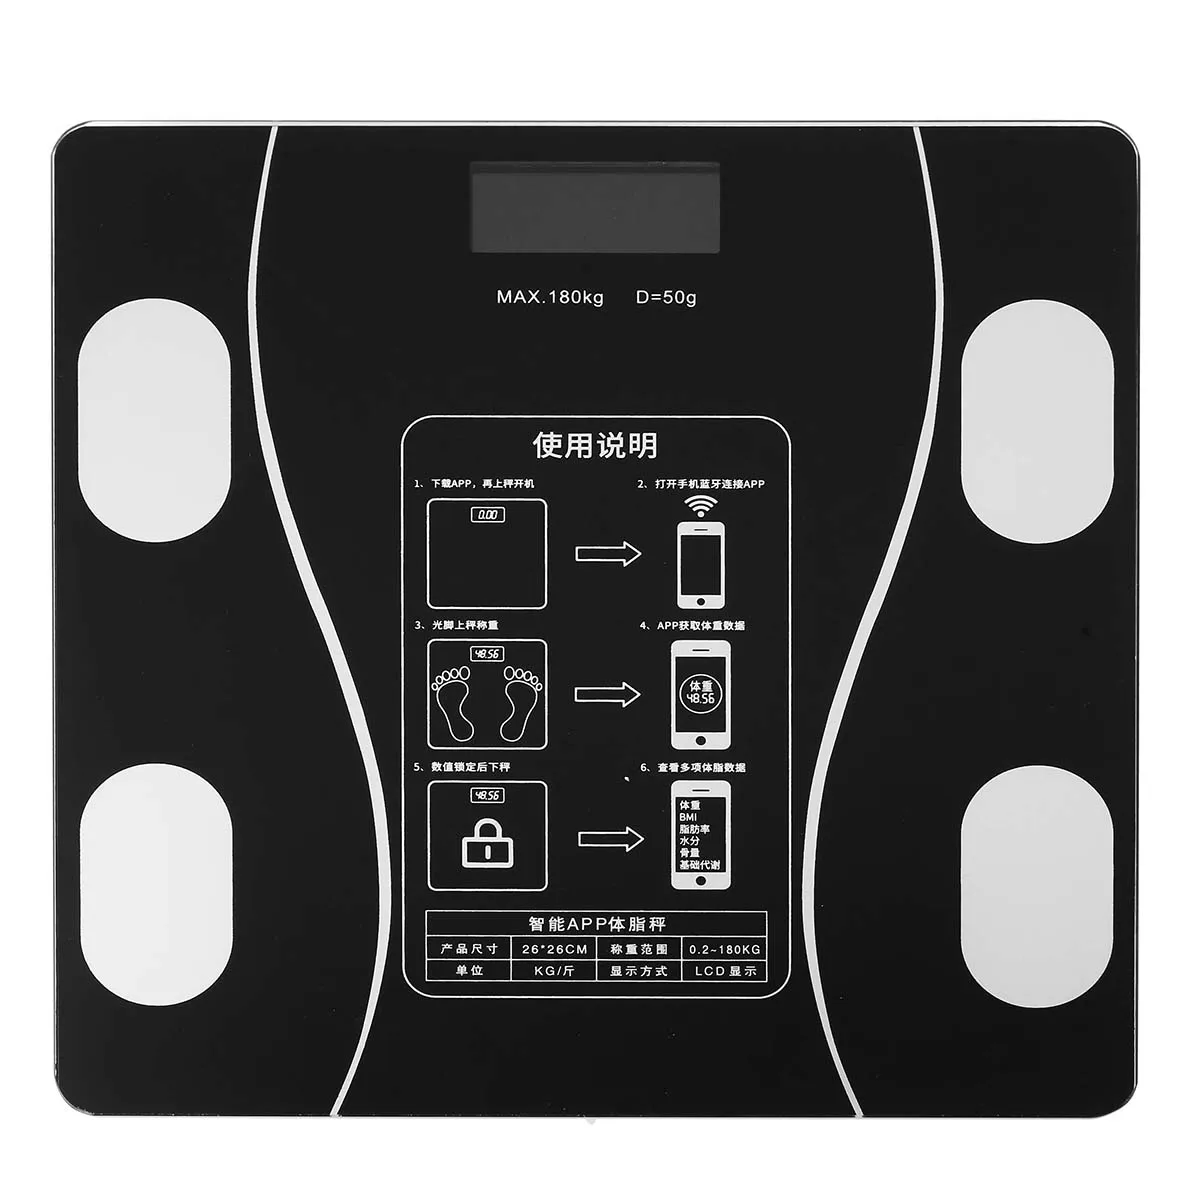 https://ae01.alicdn.com/kf/H0890ca104b60480eaa043c1f7753359fr/Max-180kg-Smart-Electronic-bluetooth-Digital-Body-Weight-Scale-APP-Scale-BMI-Fitness-Weight-Tracking-Support.jpg